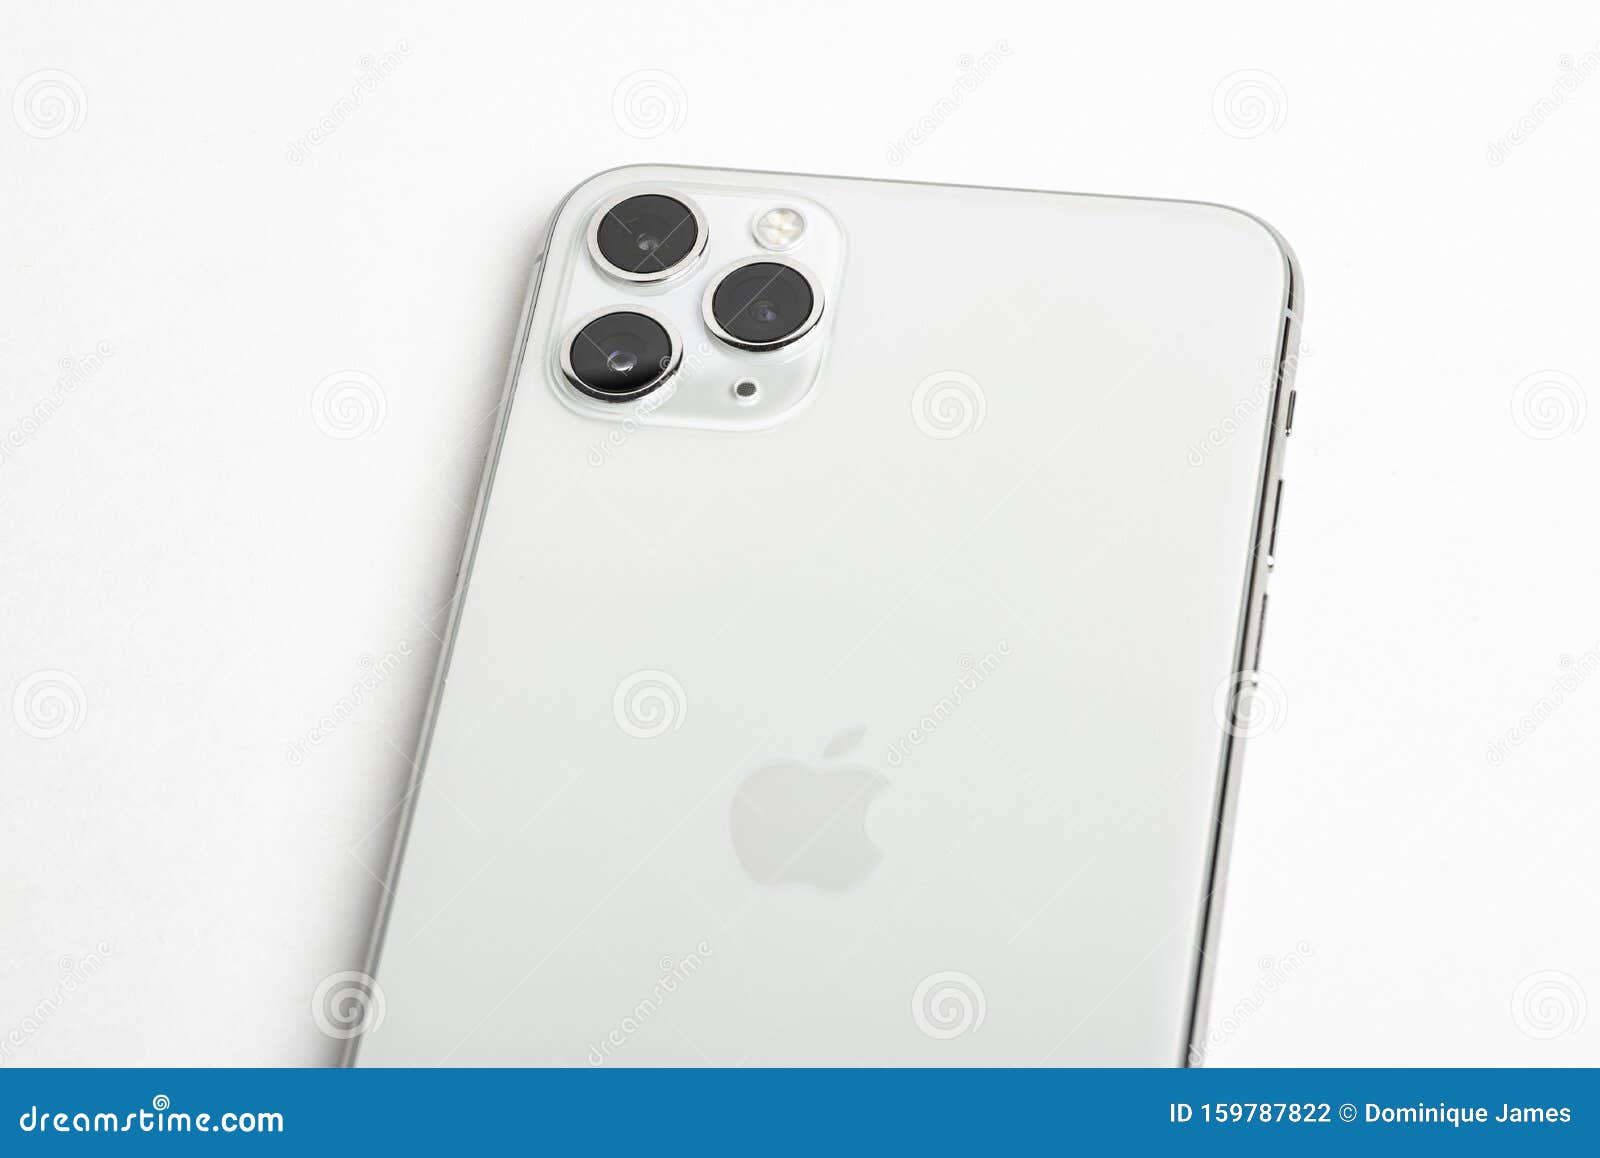 Iphone 11 Pro Max Silver Editorial Photography Image Of Online